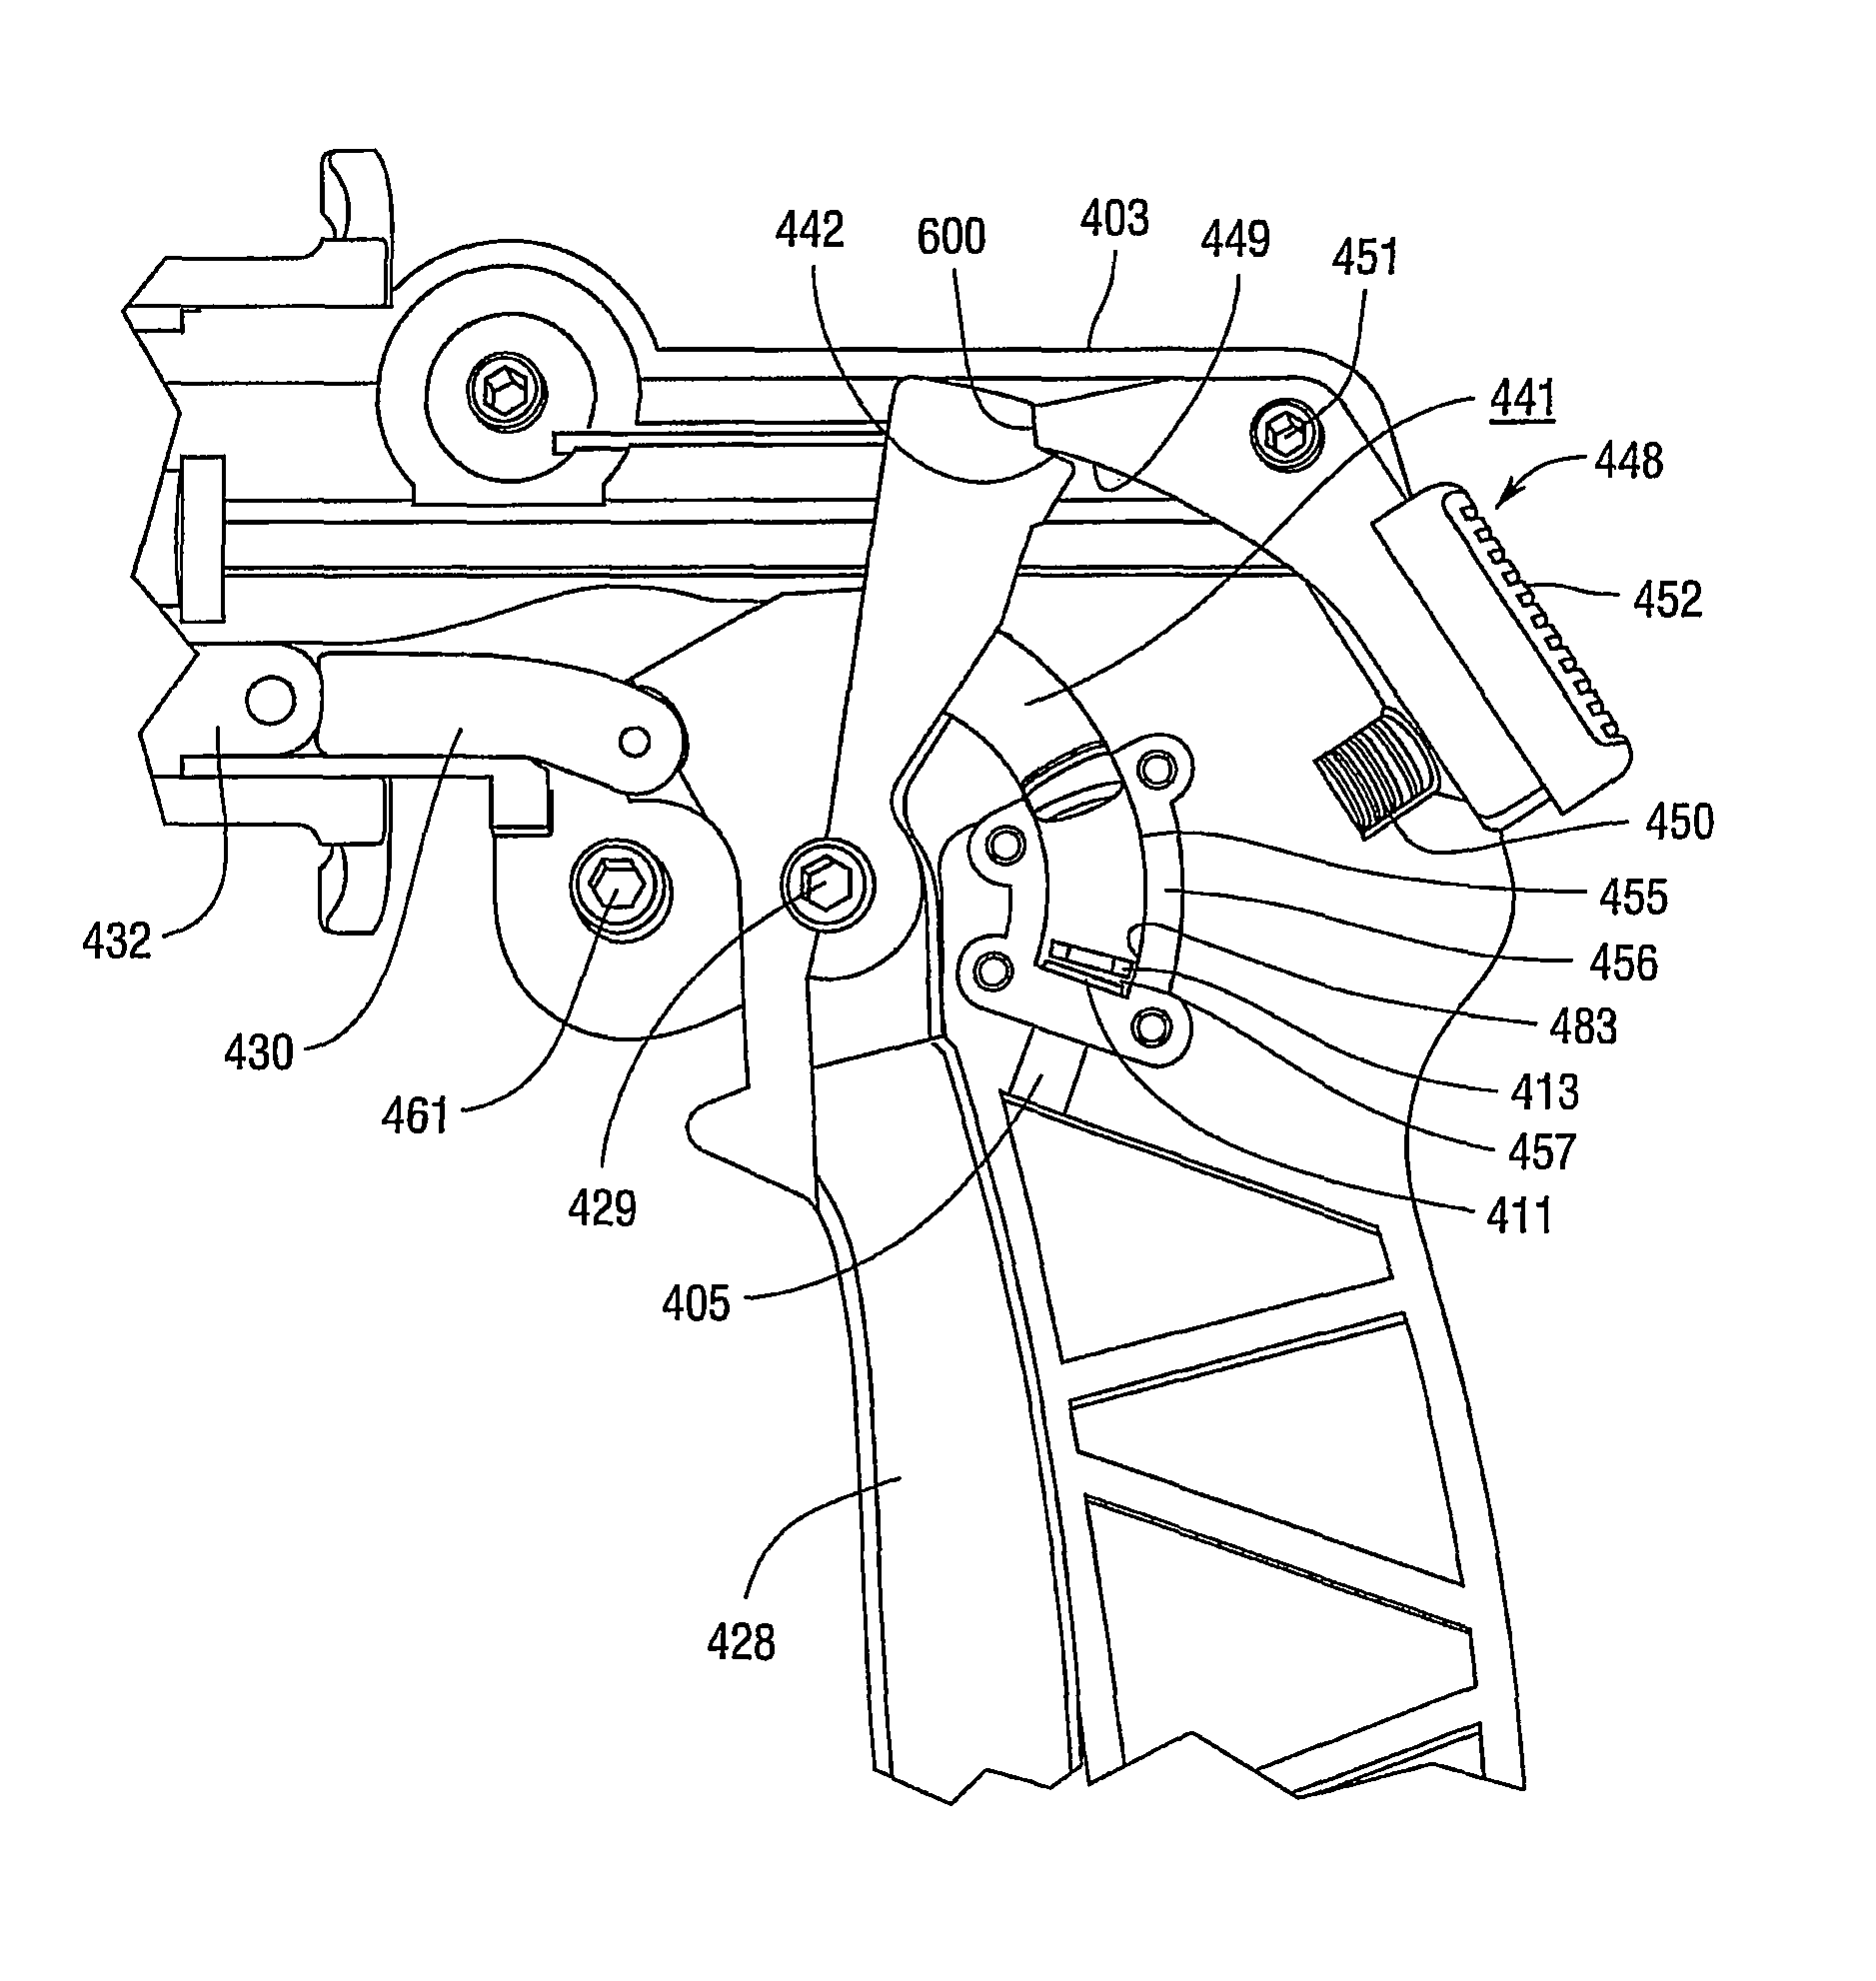 Dampening device for endoscopic surgical stapler